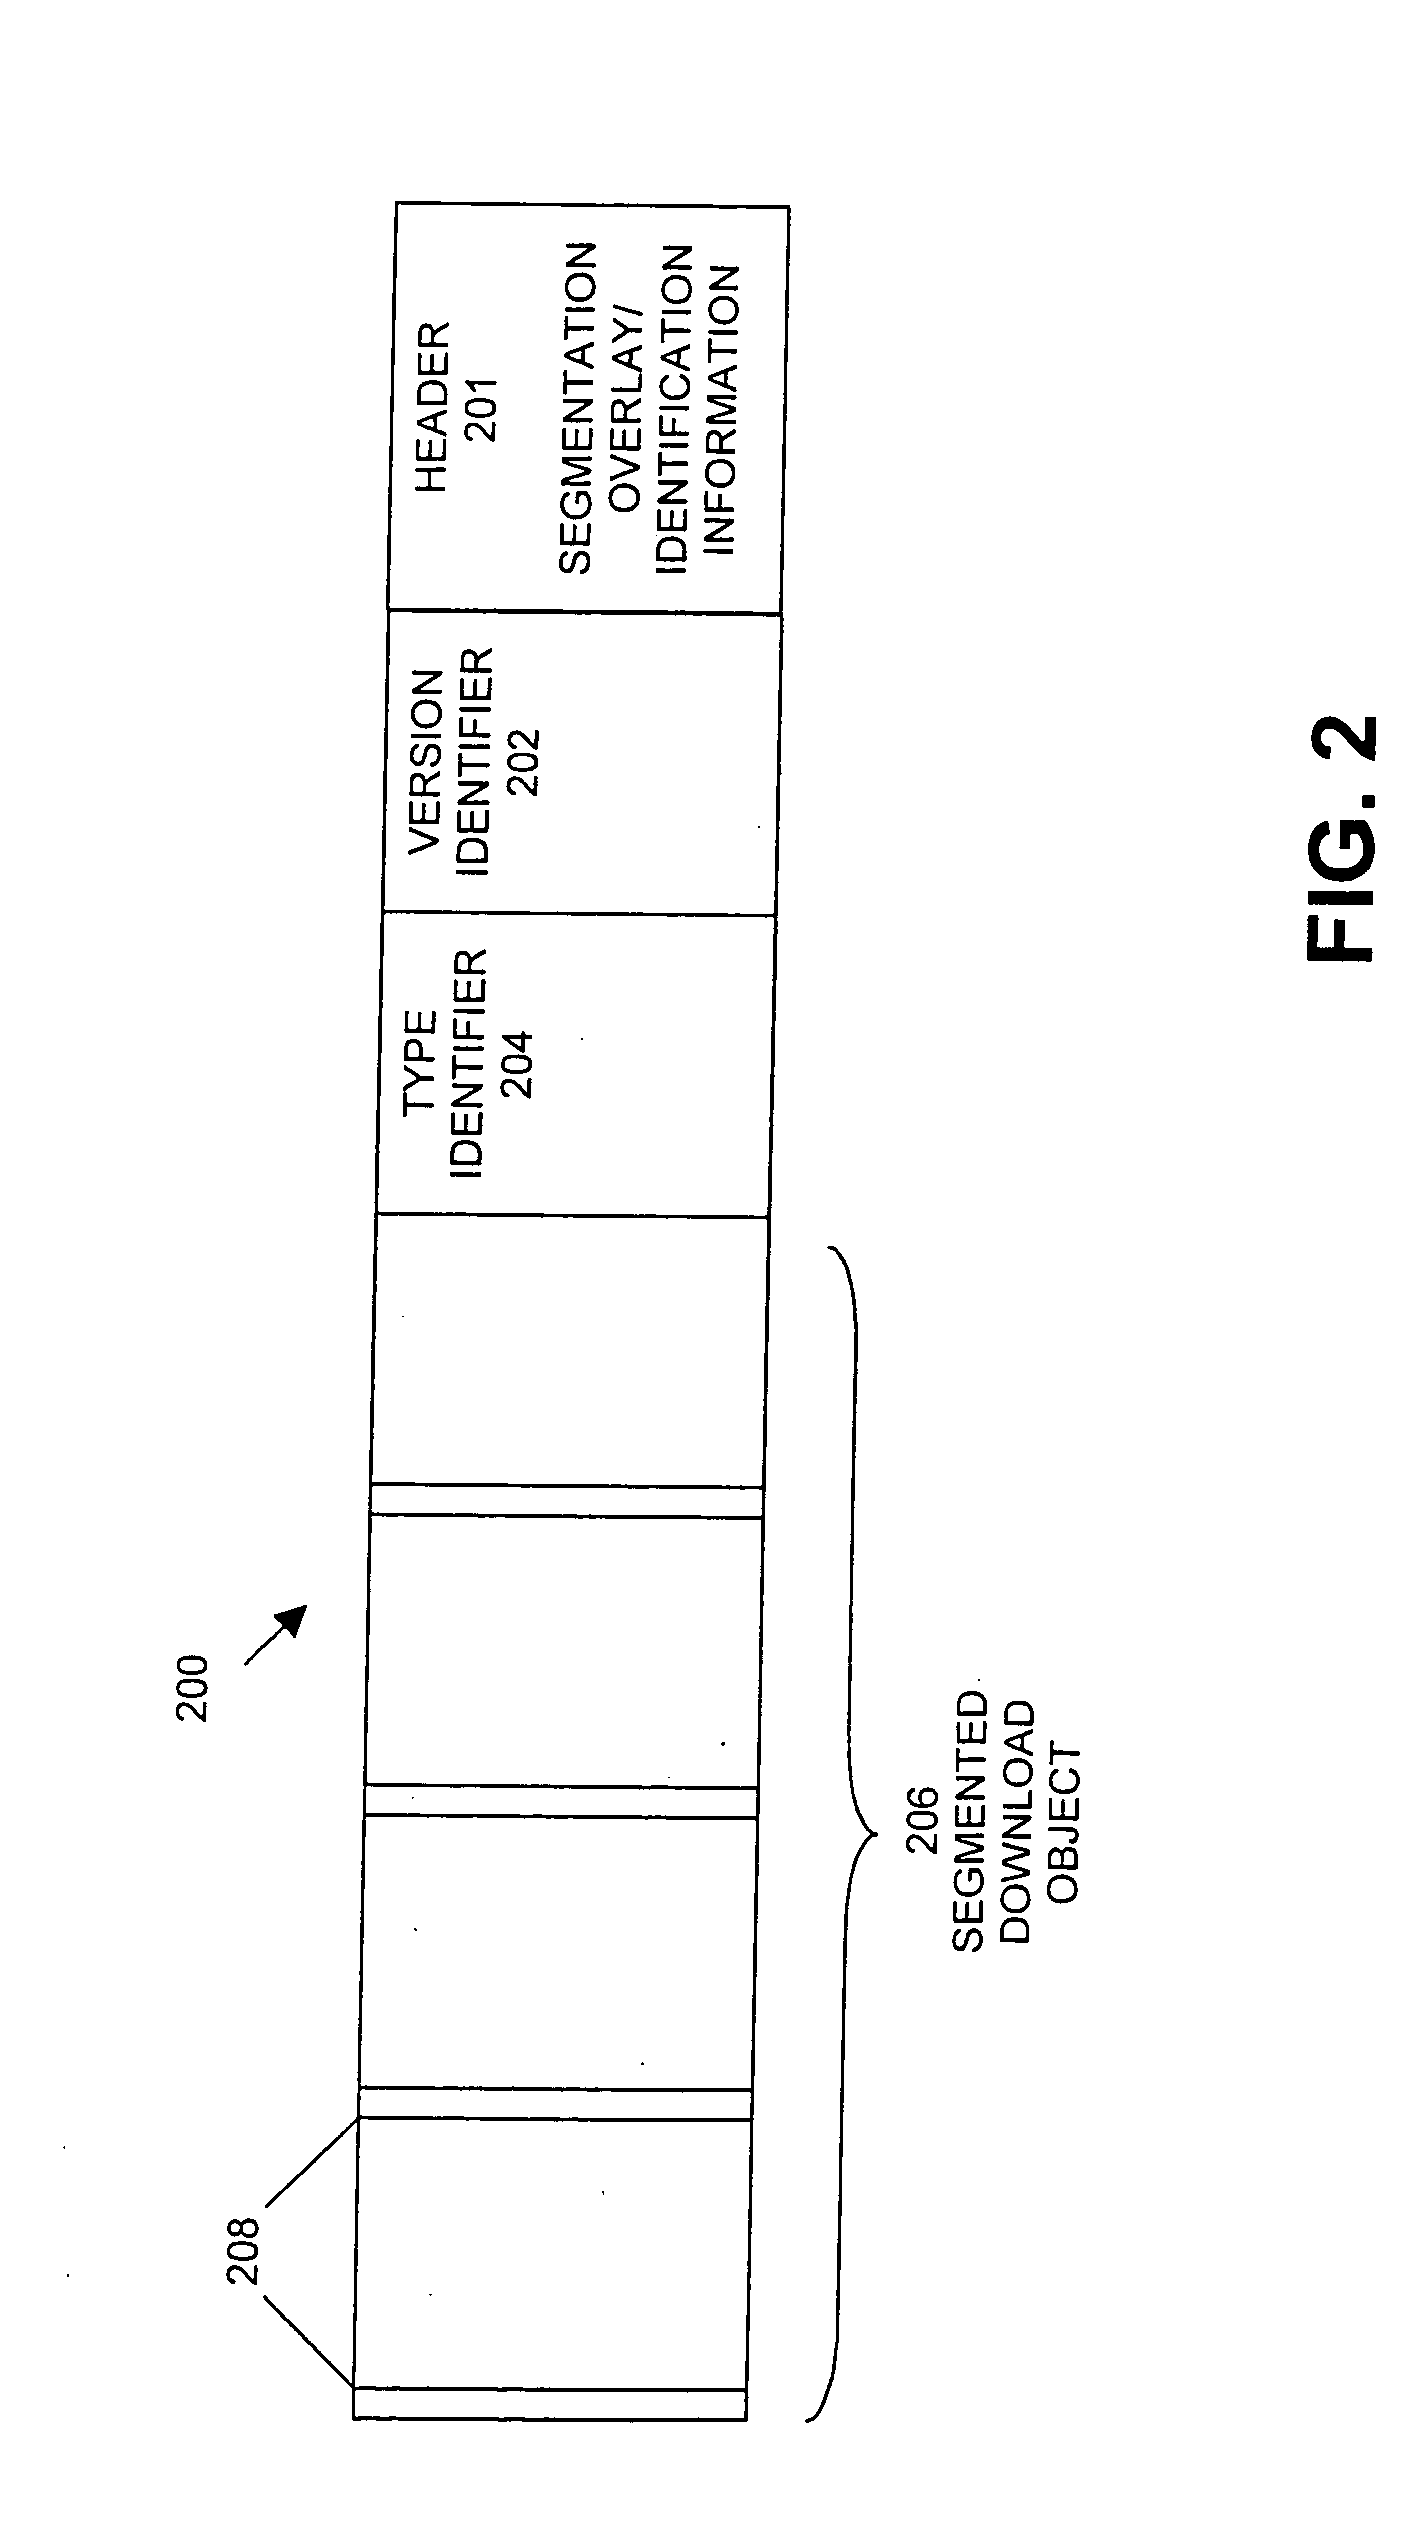 Methods and systems for enabling software and firmware downloads to high definition television appliances